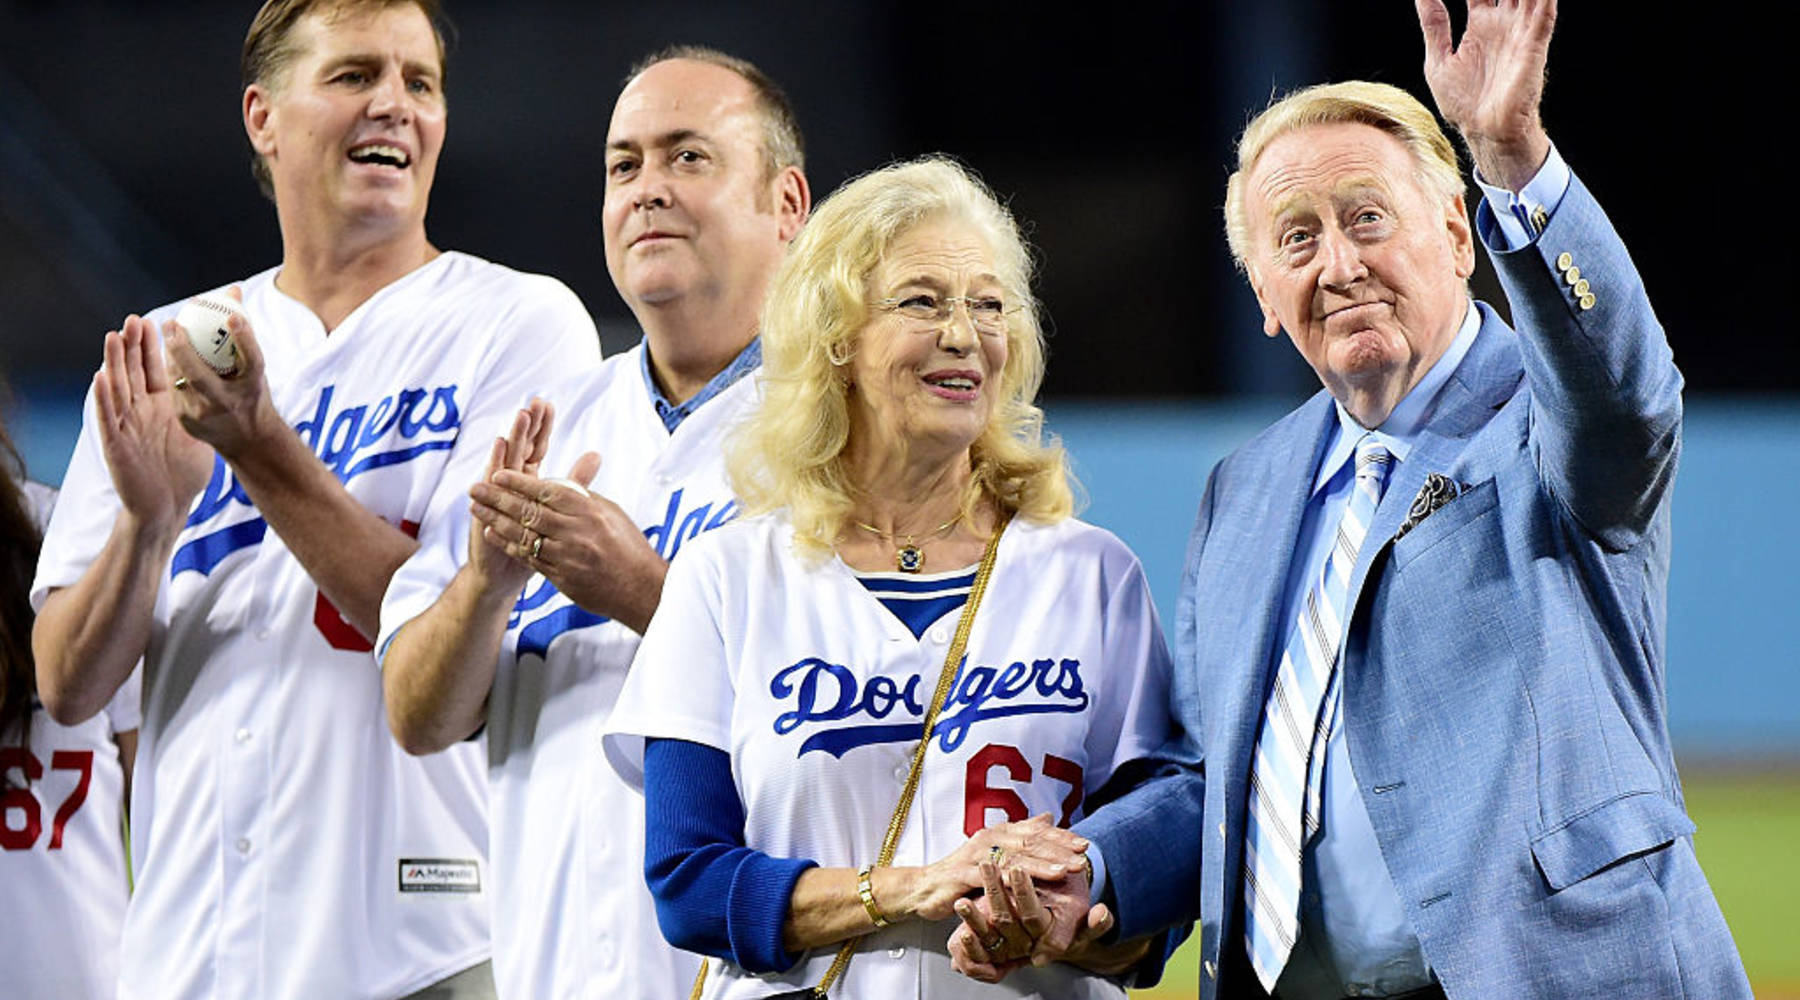 dodgers jersey vin scully